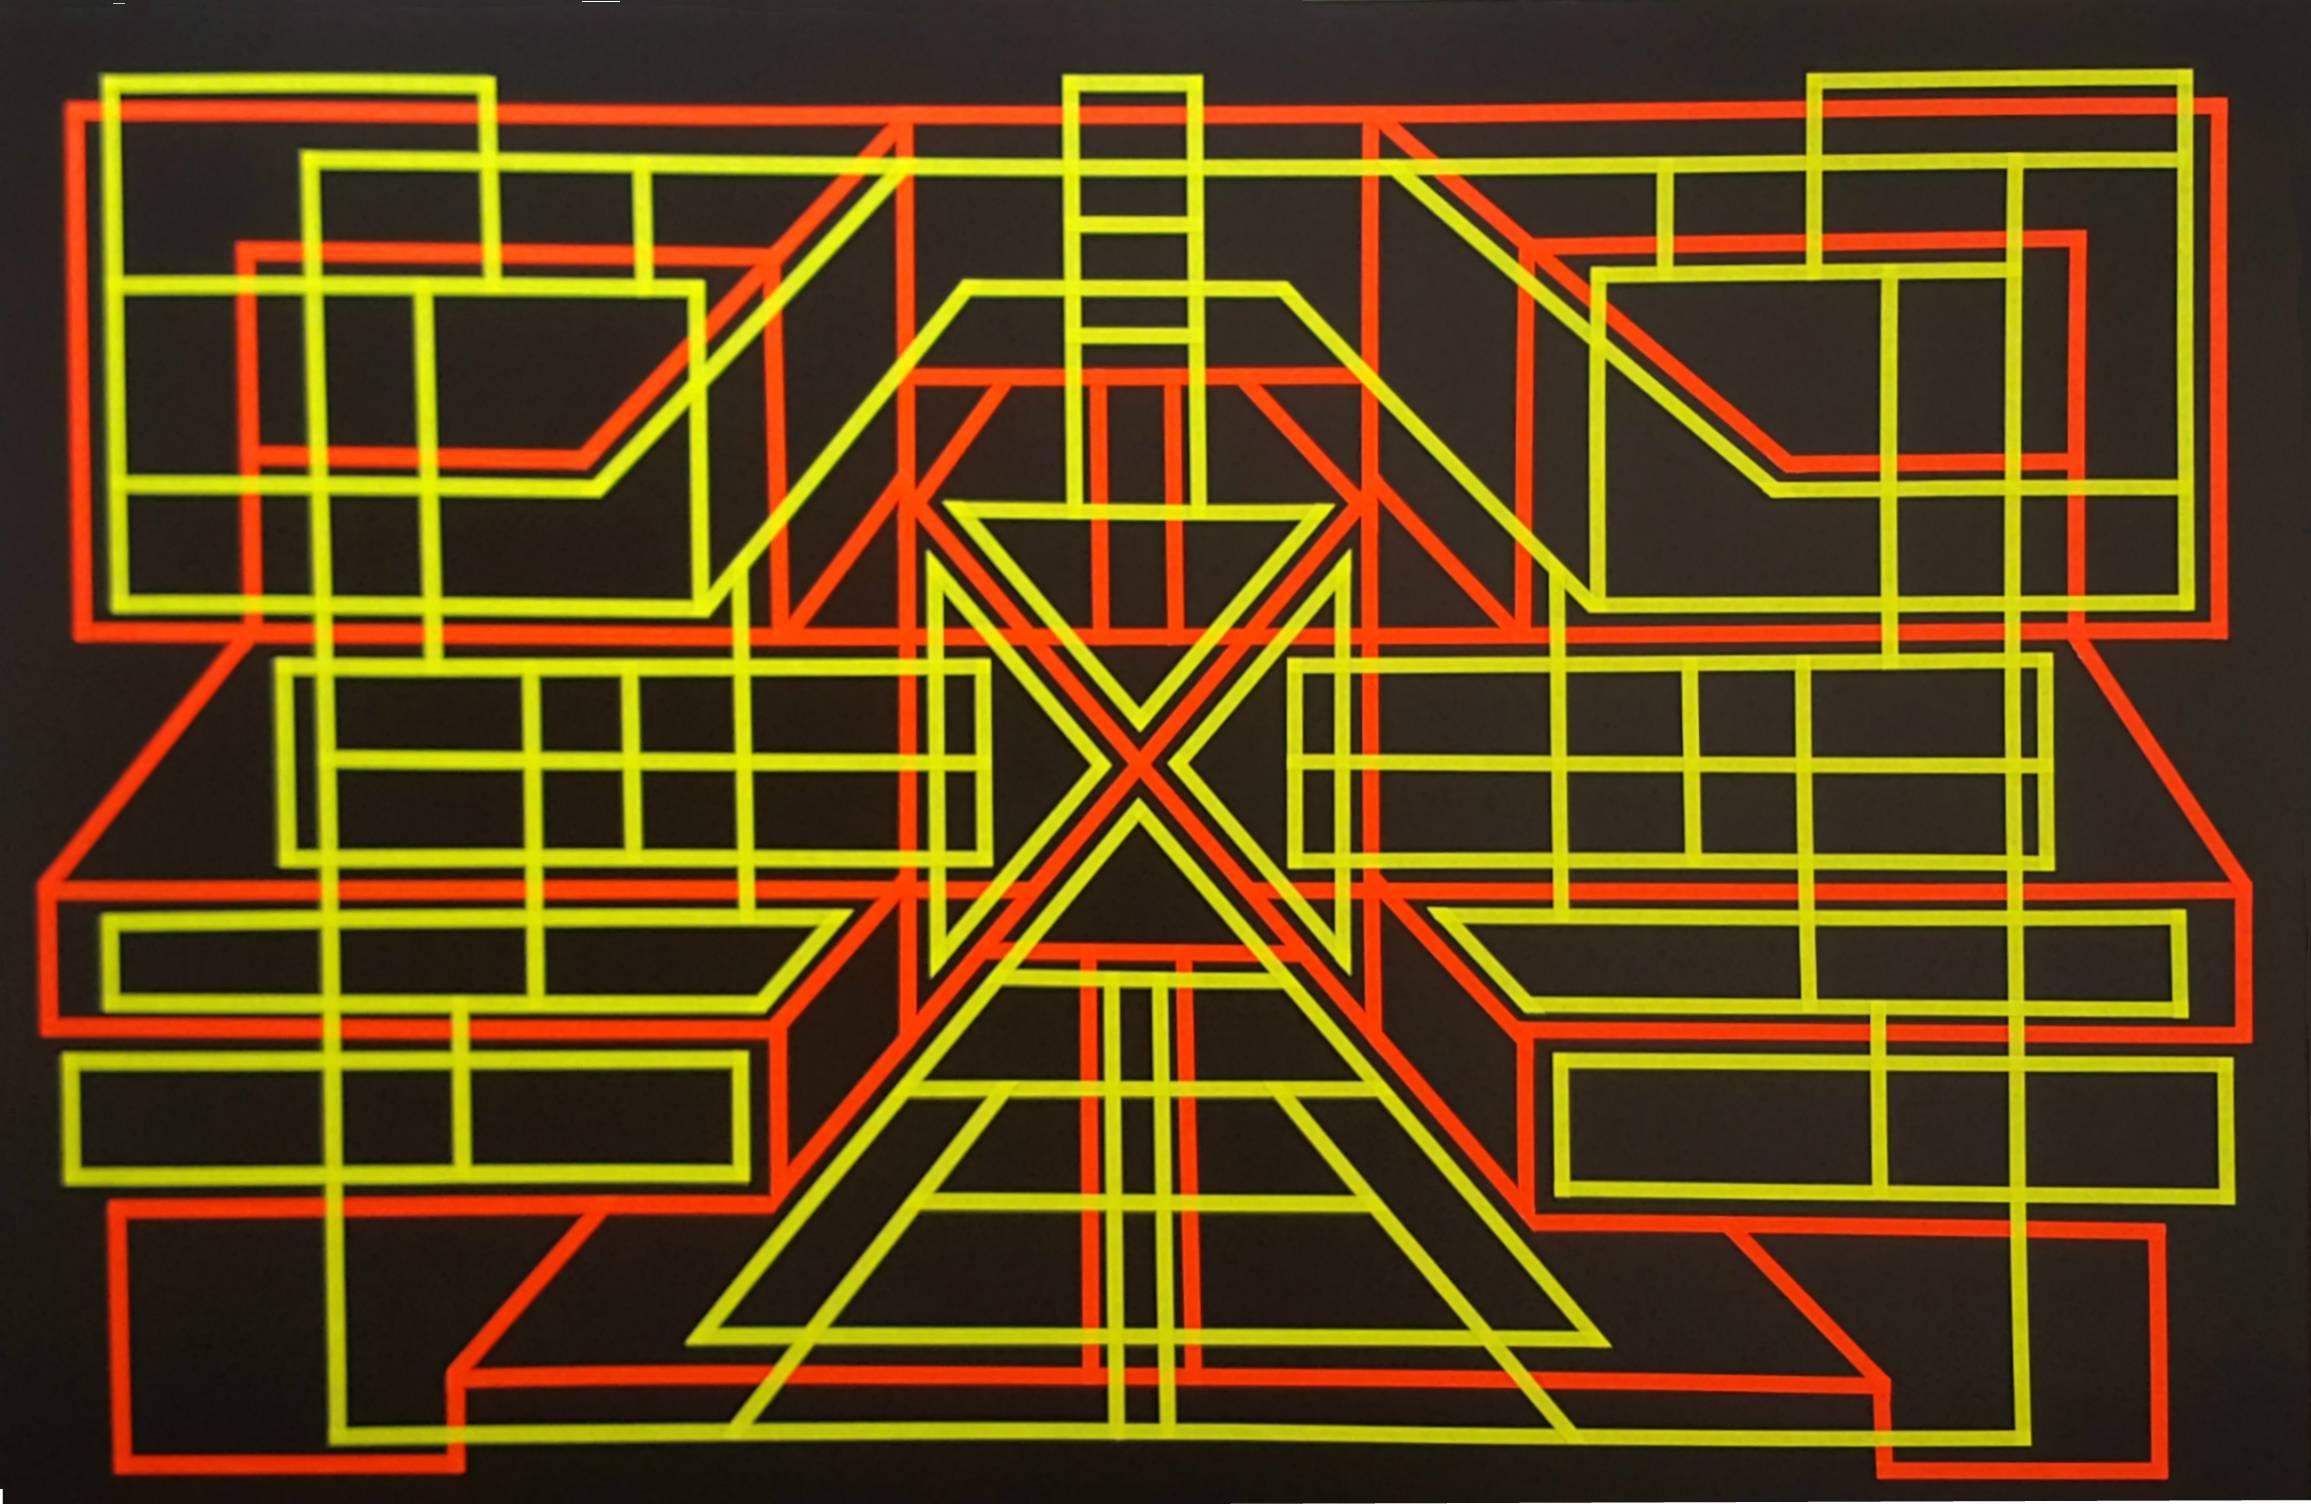 "Gateway 64" by Gazoo ToTheMoon is a unique, mixed media on wood artwork signed by the artist on the back. The tape glows under black light. It comes with a numbered and signed certificate of authenticity.

Gazoo ToTheMoon’s paint installations,